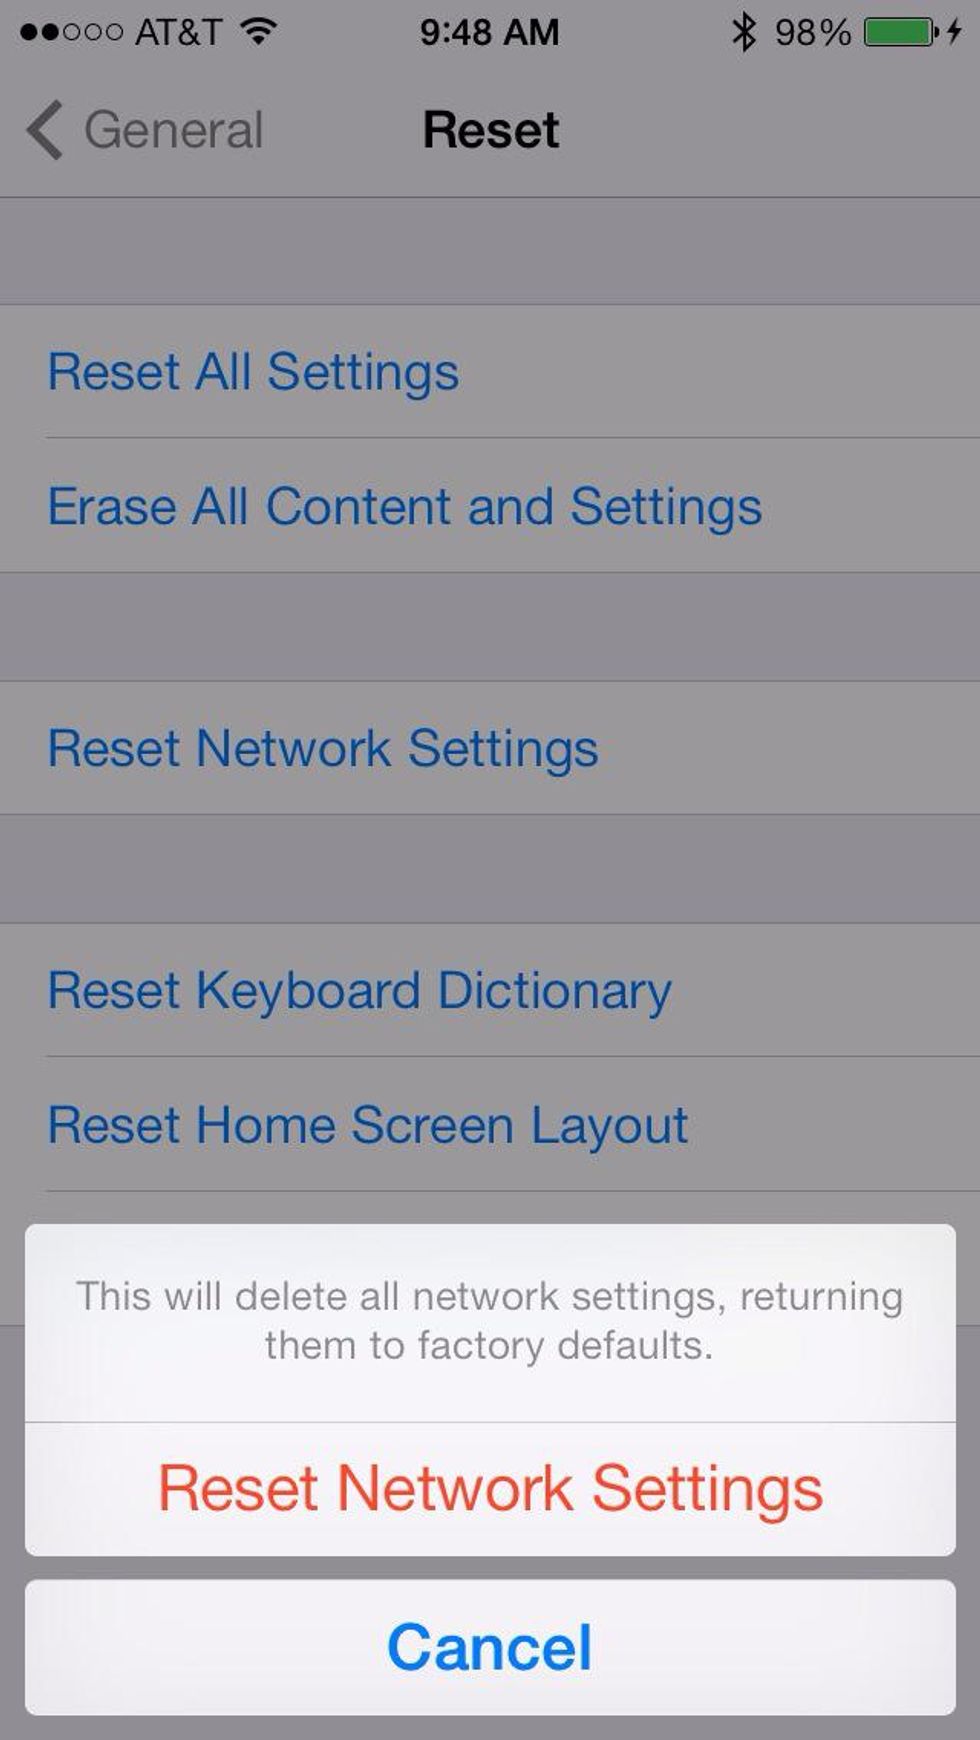 How to fix network issues with iphone - B+C Guides